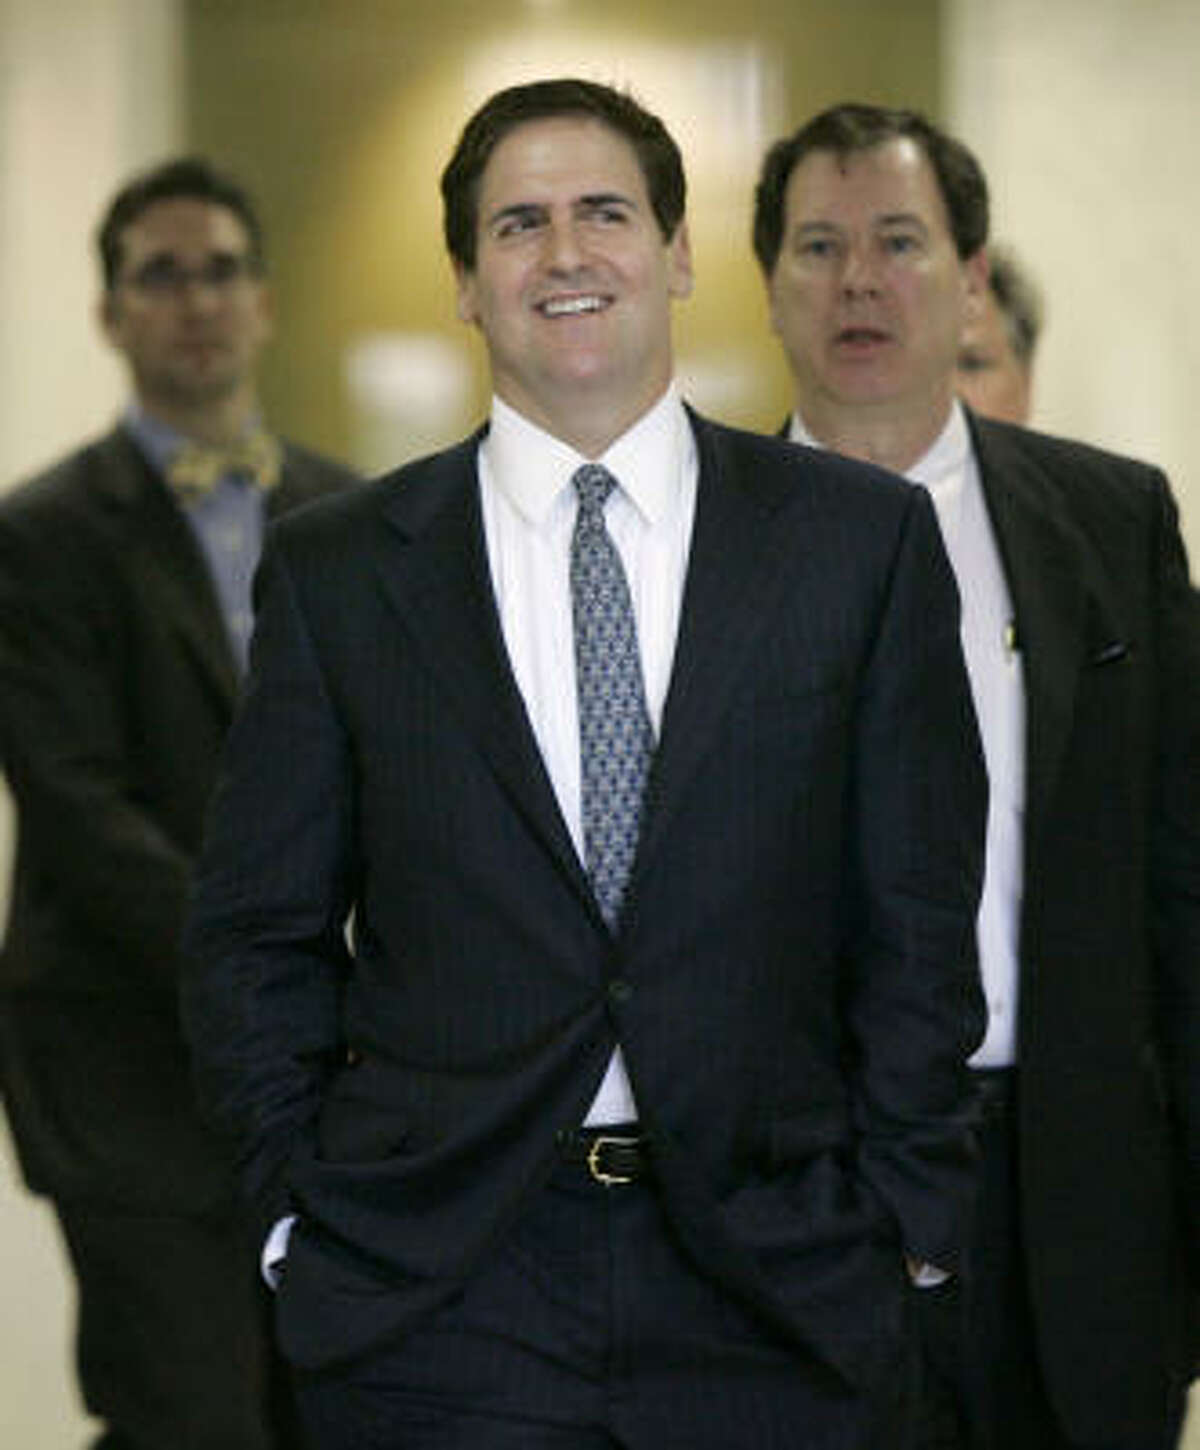 Mavericks owner Mark Cuban walks out of his federal hearing accompanied by members of his legal team May 26.